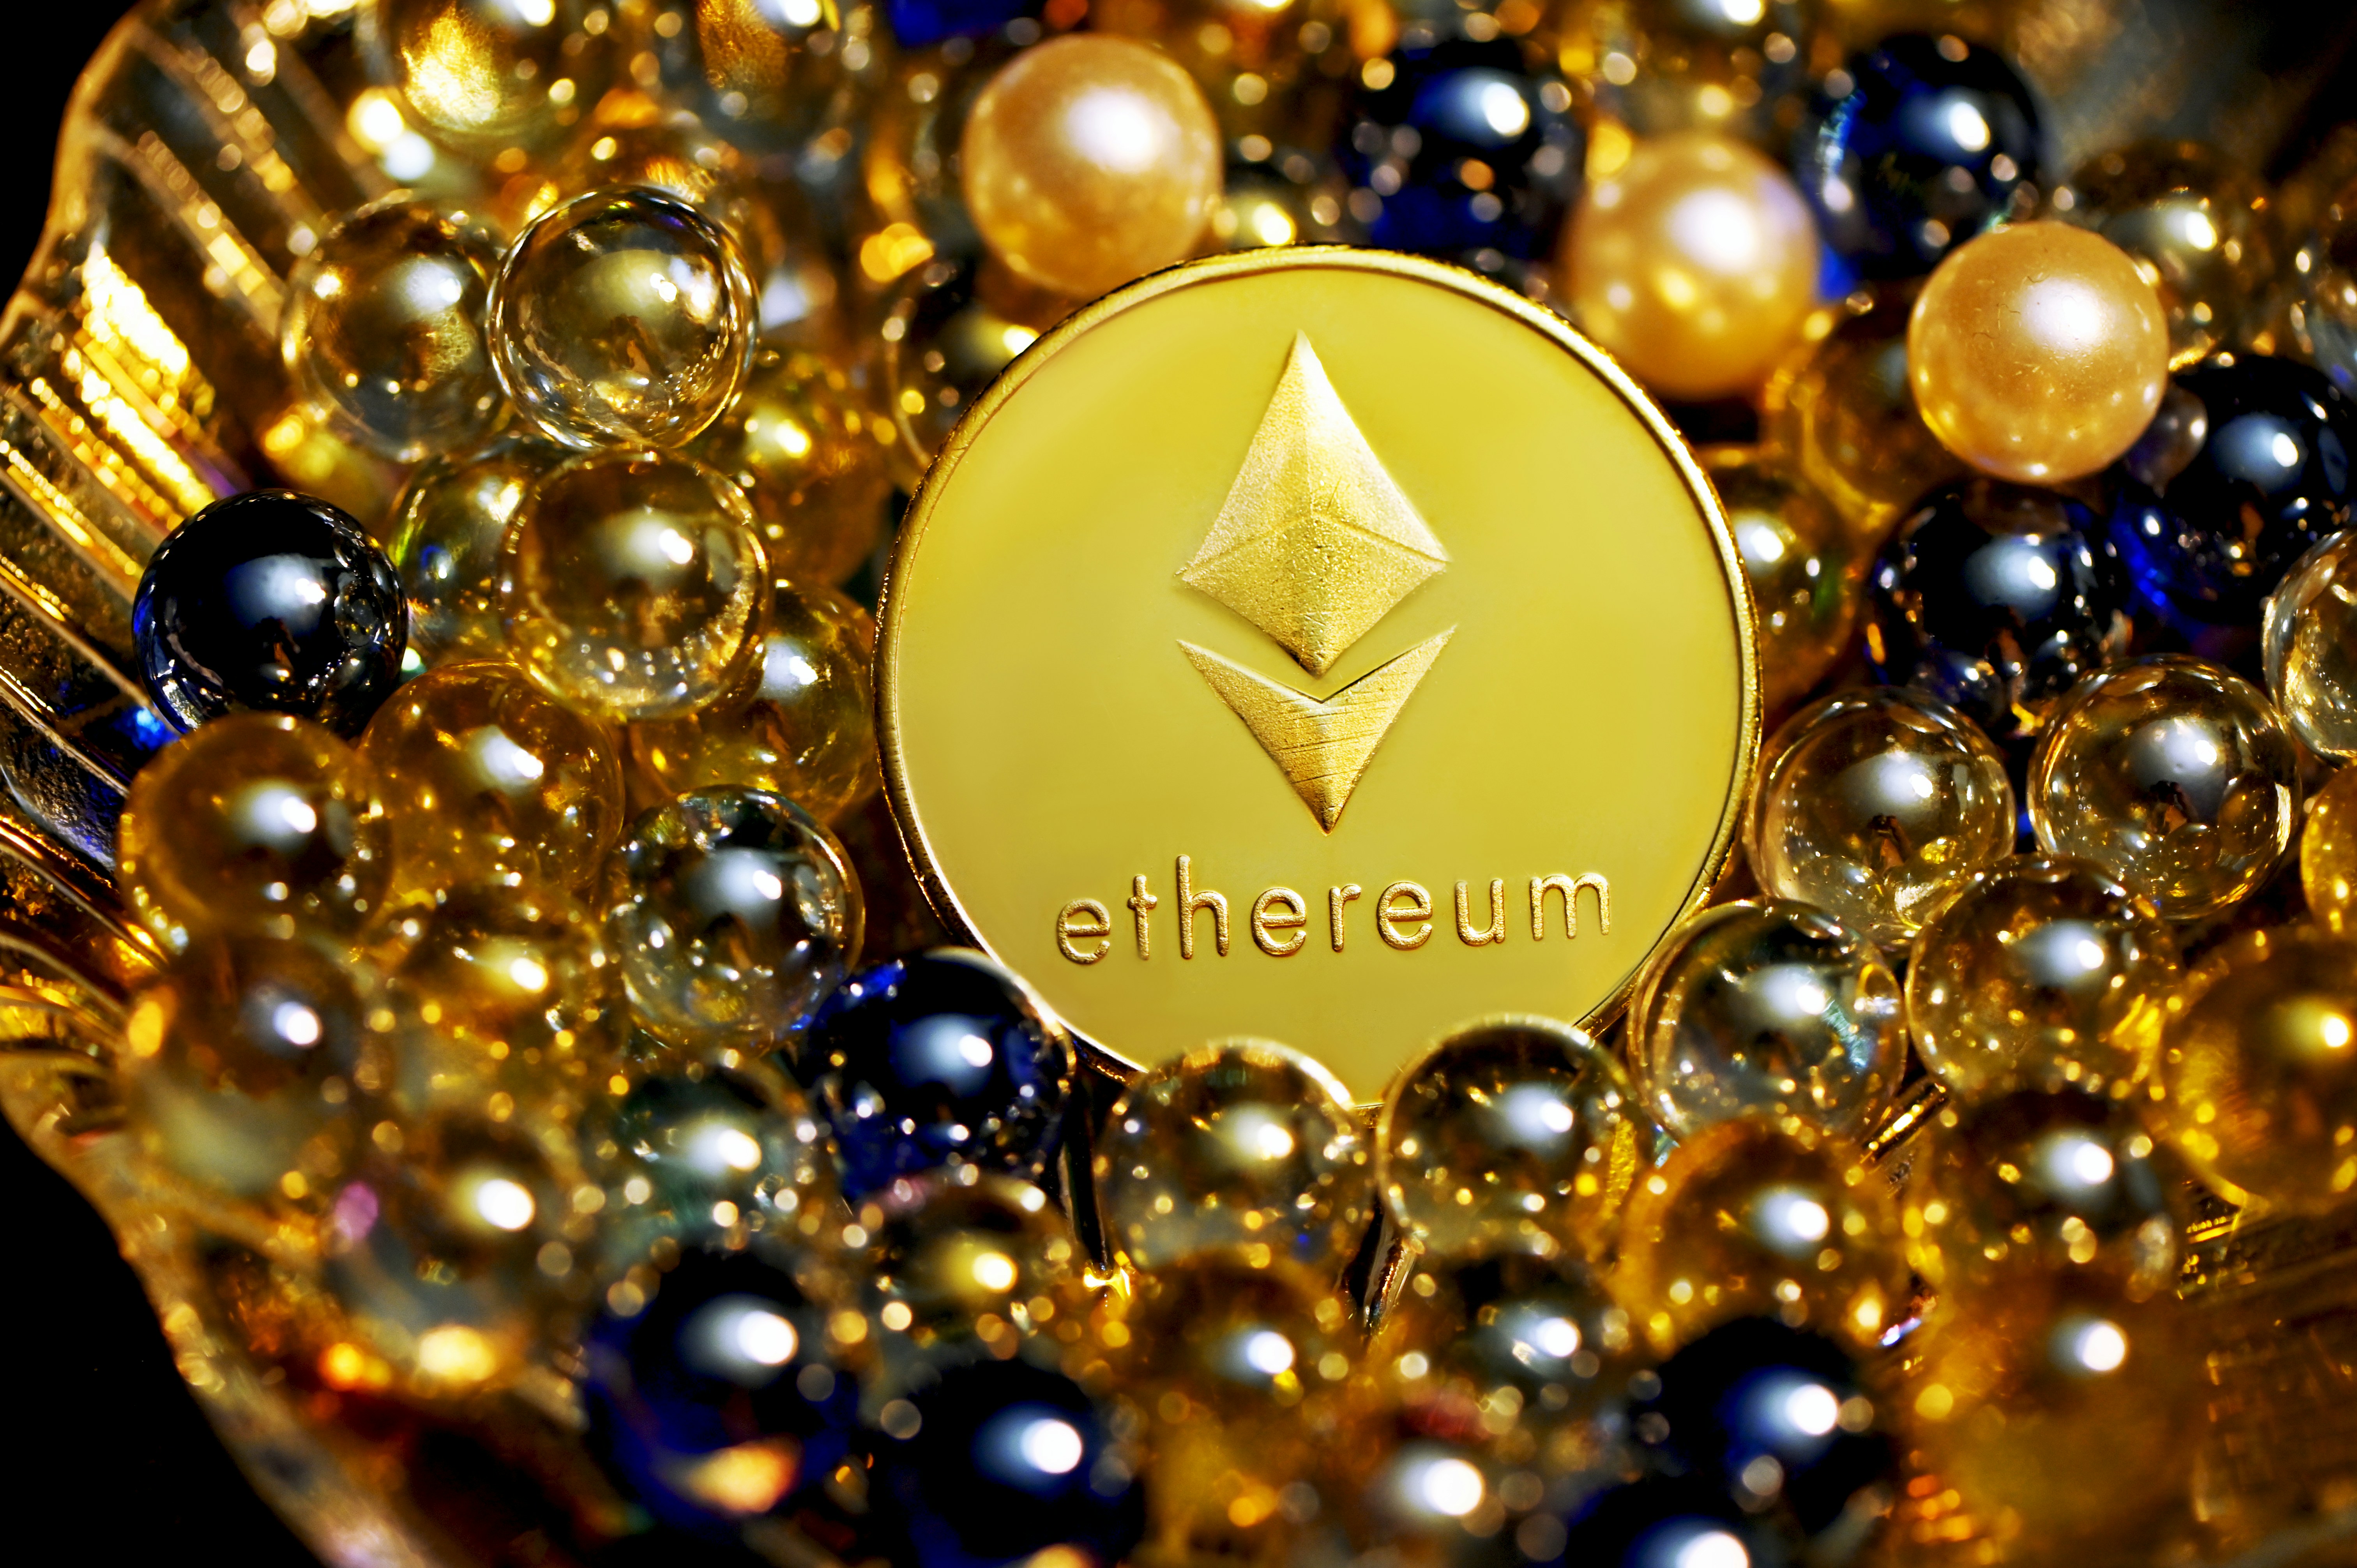 An Ethereum coin held in a golden plate with colorful pearls